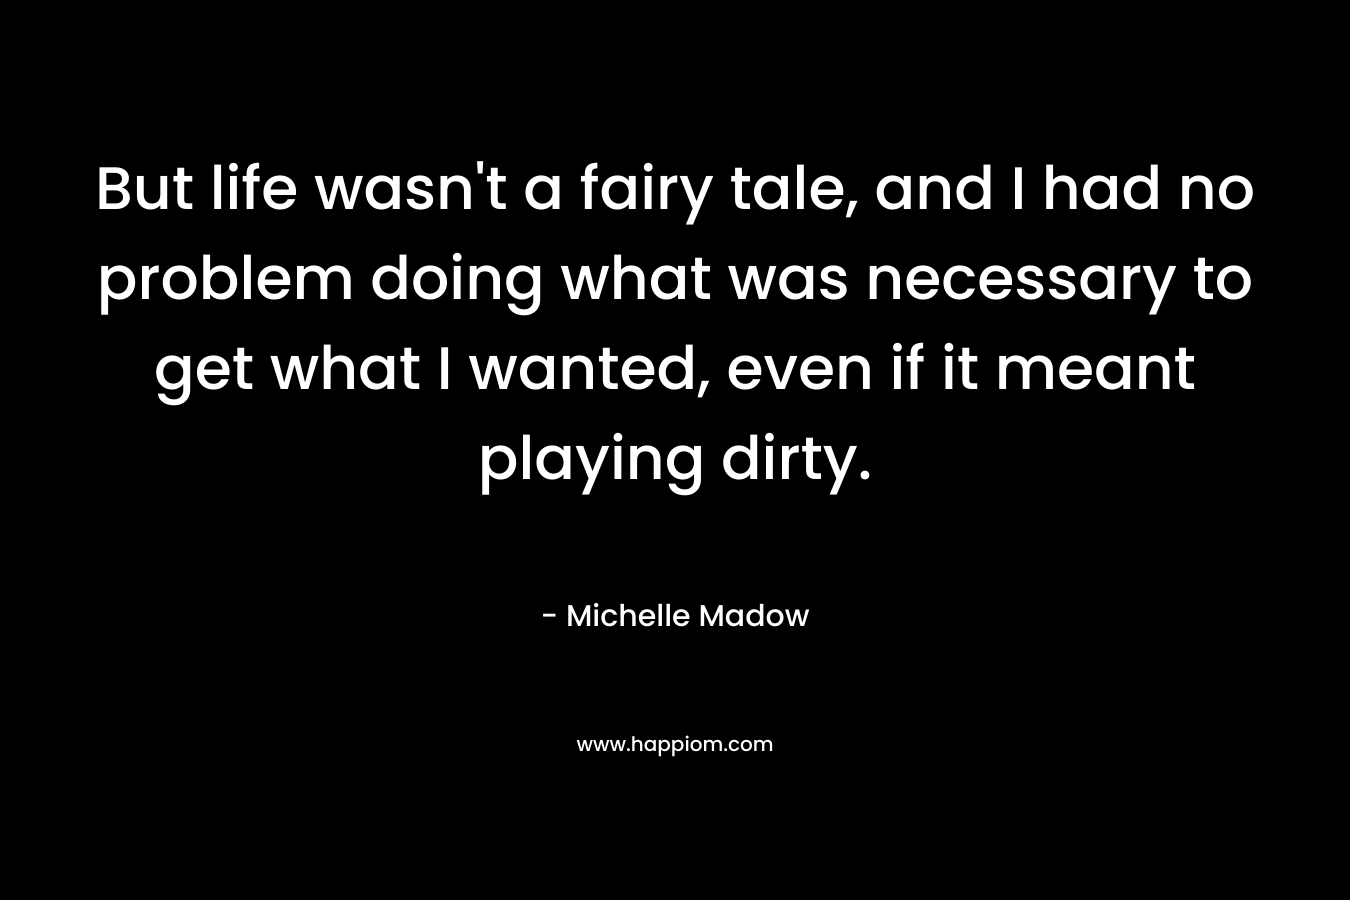 But life wasn’t a fairy tale, and I had no problem doing what was necessary to get what I wanted, even if it meant playing dirty. – Michelle Madow